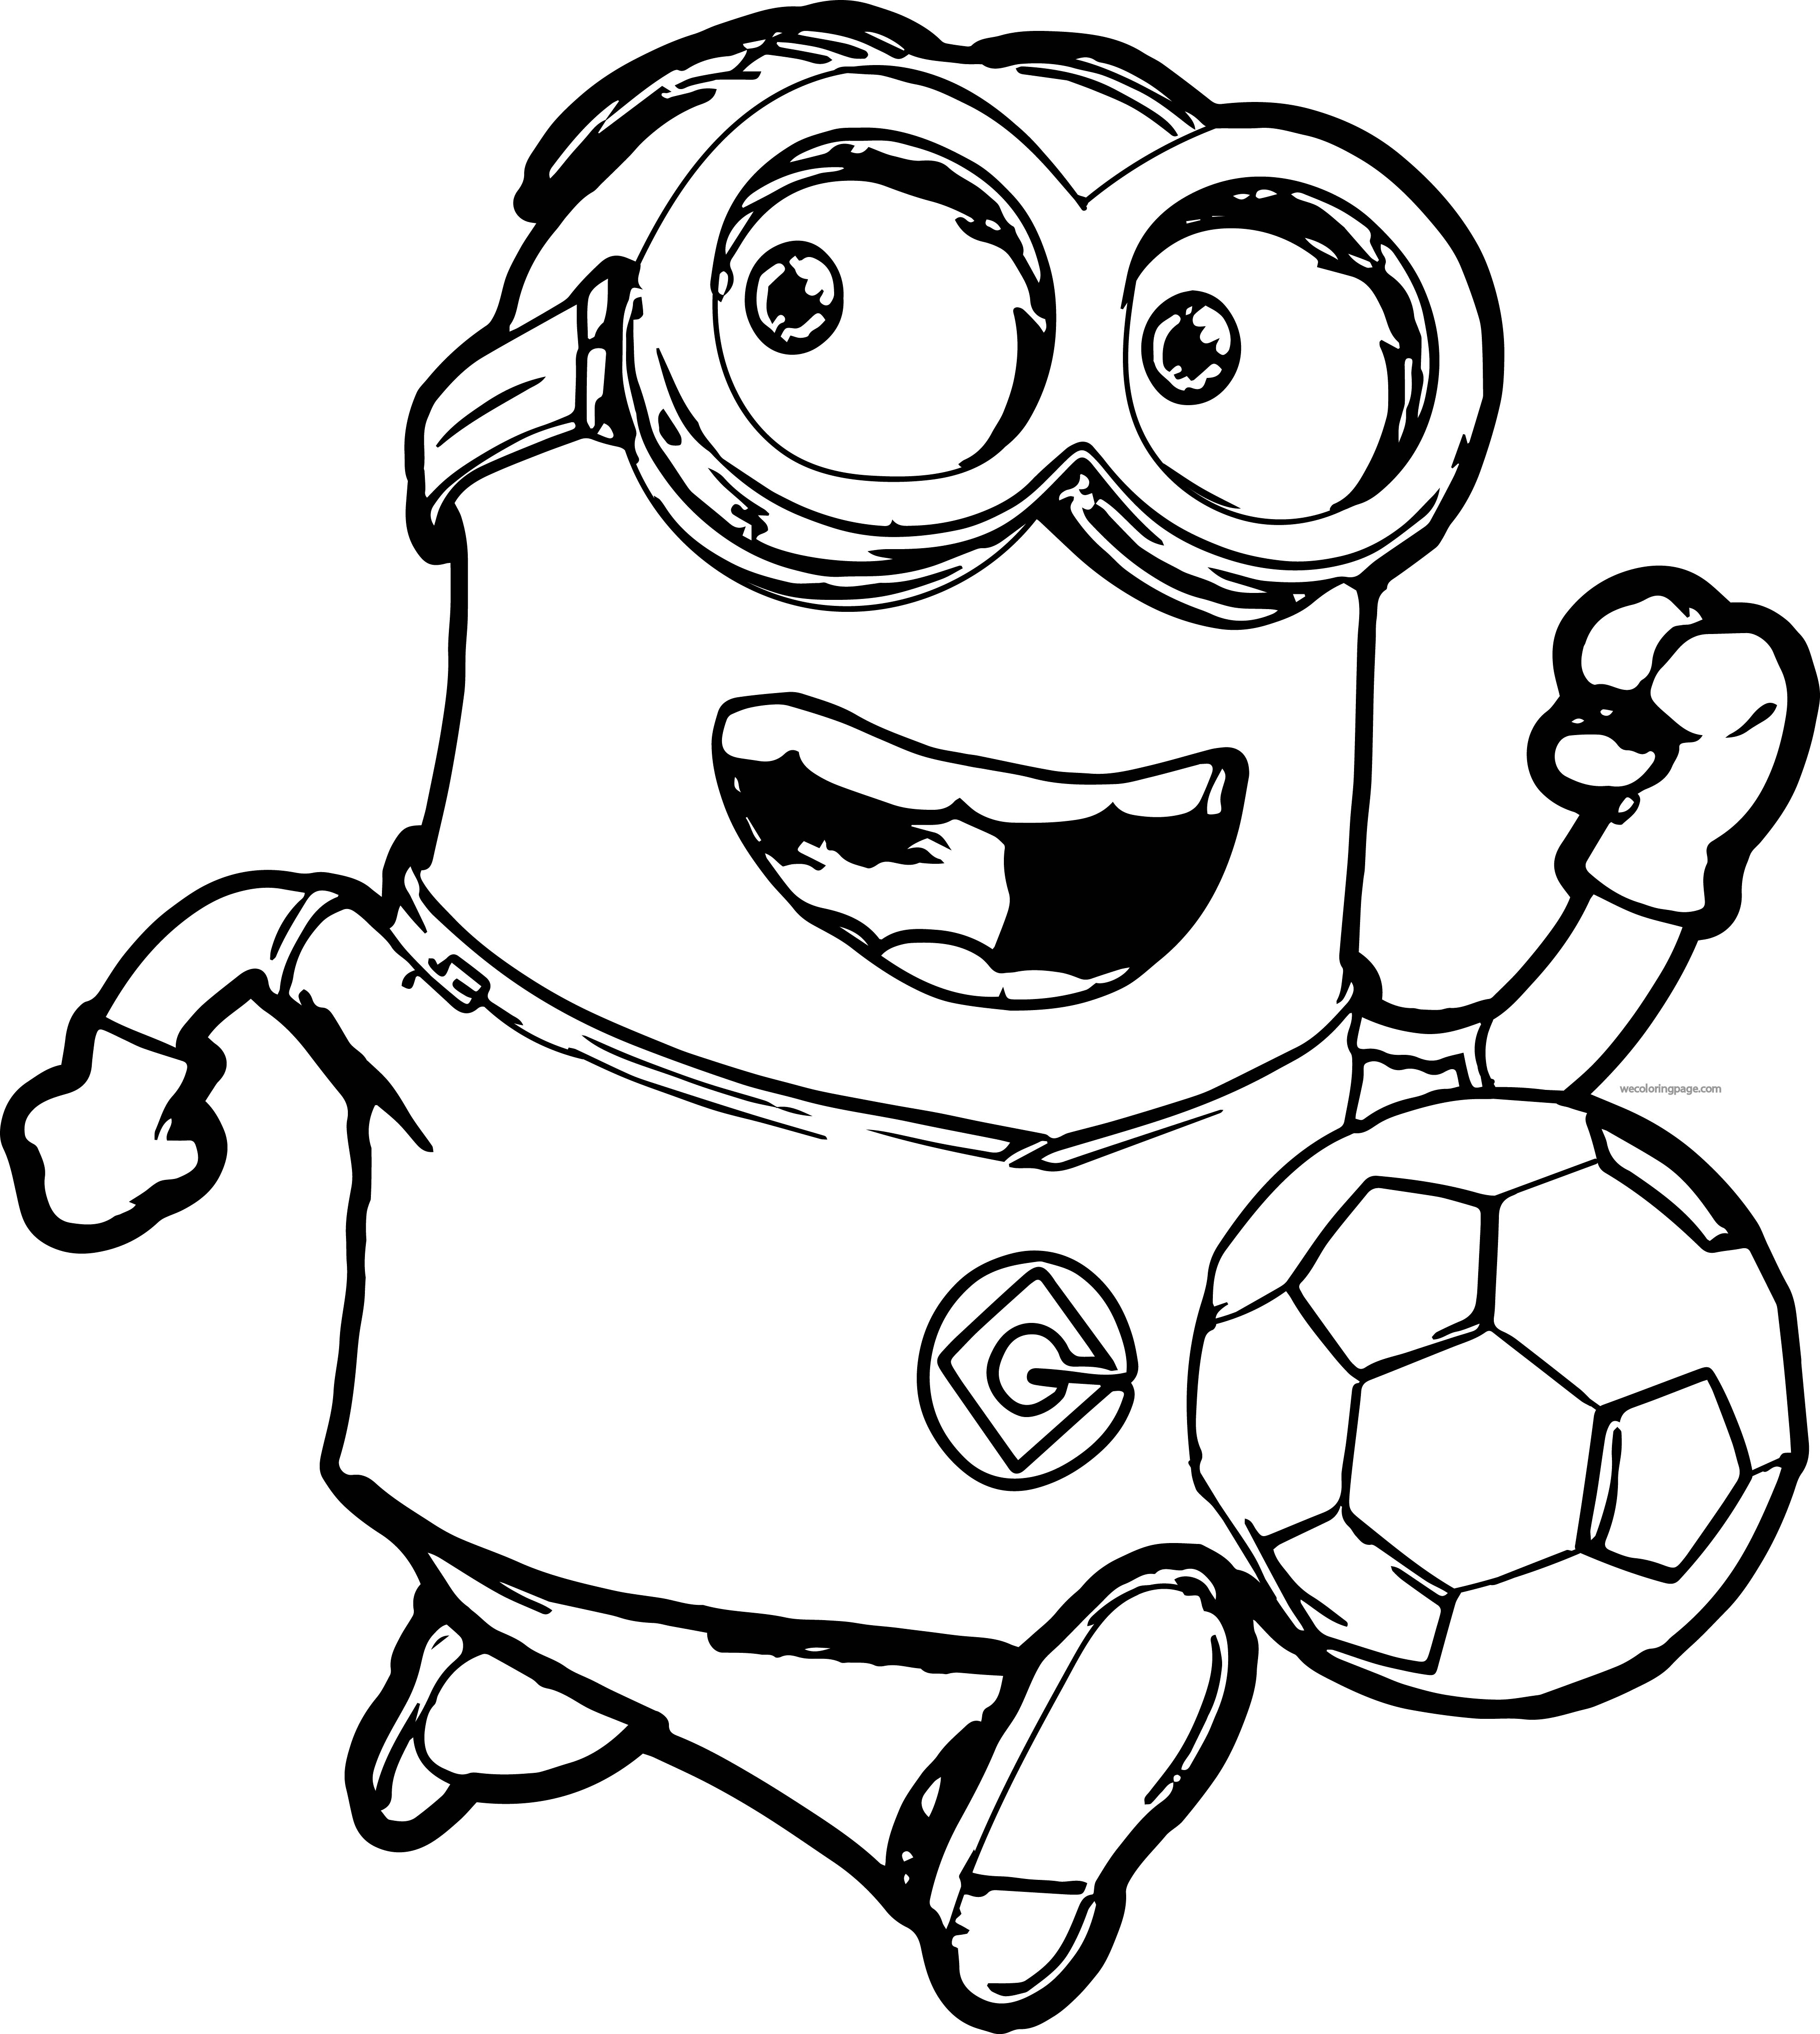 Download Minion Coloring Pages - Best Coloring Pages For Kids